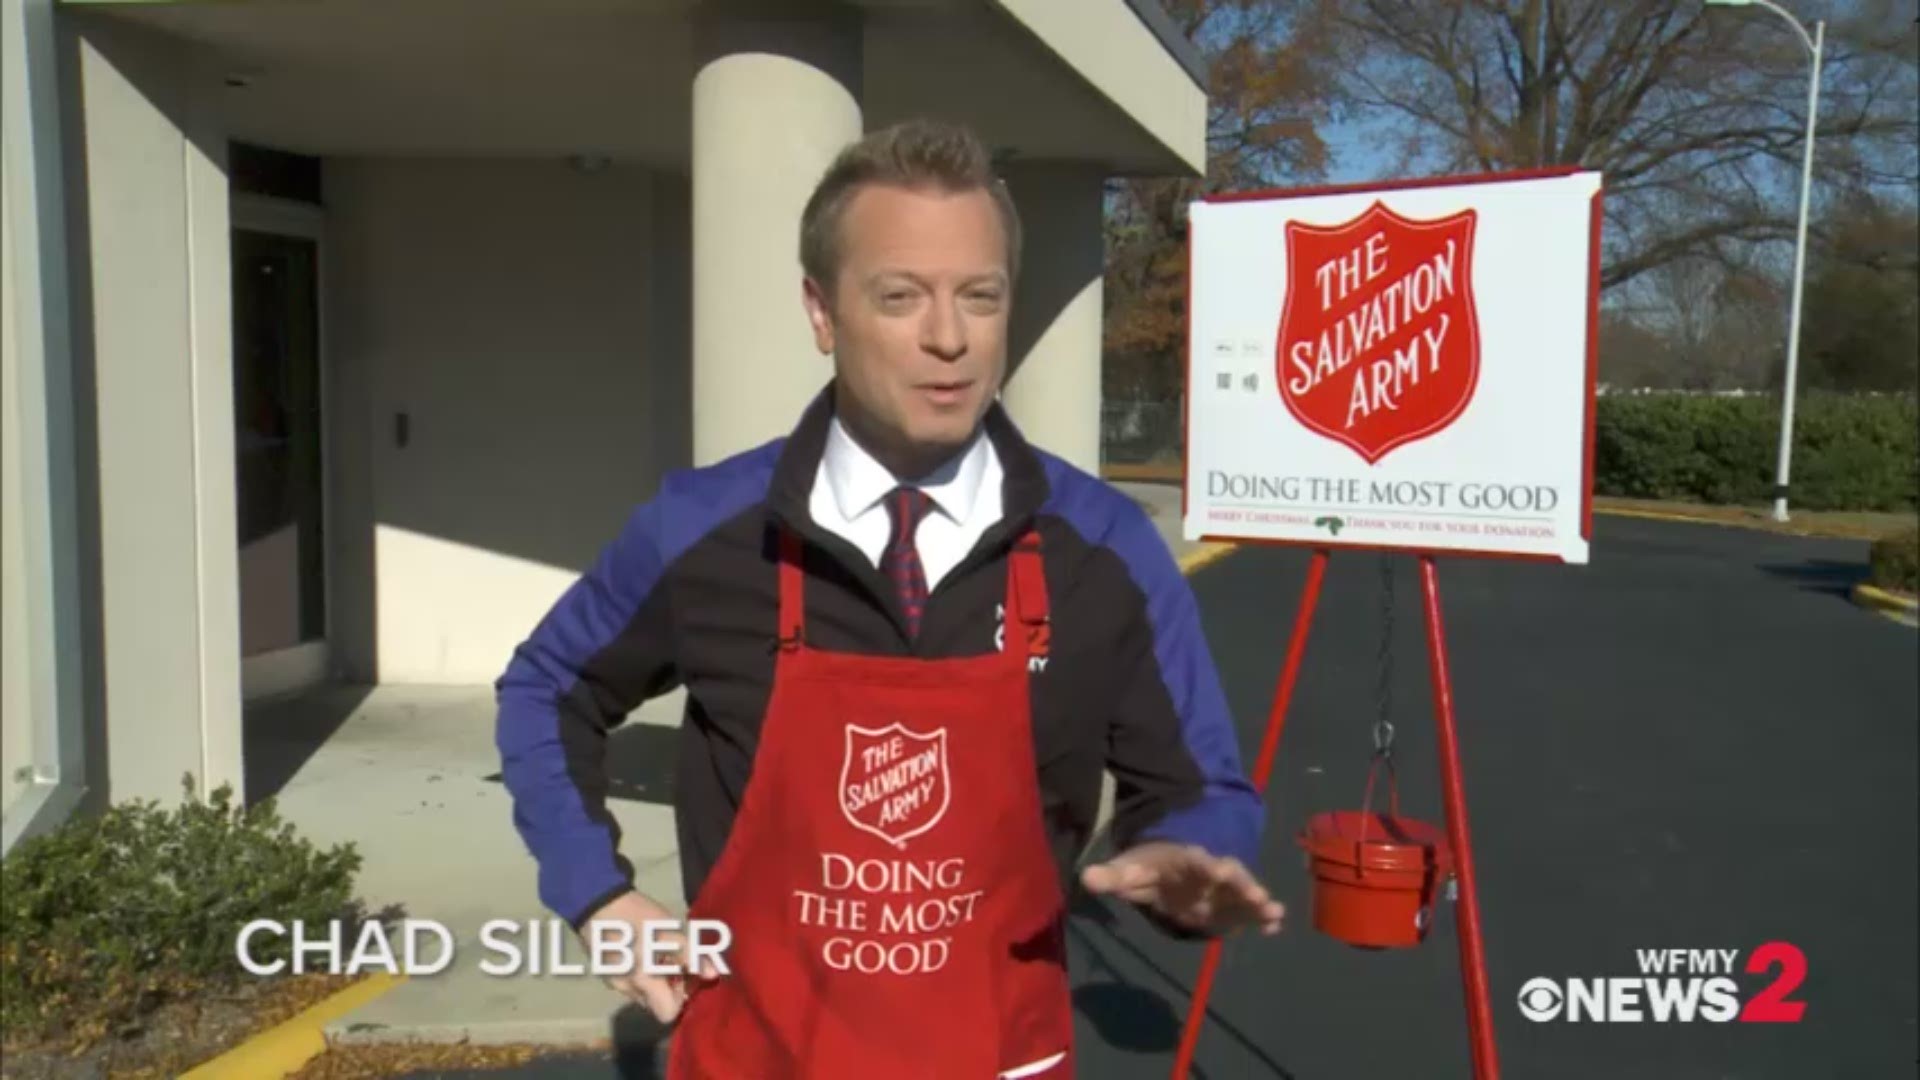 Chad Silber will be ringing the Salvation Army bells in 9 Triad cities over 5 days.